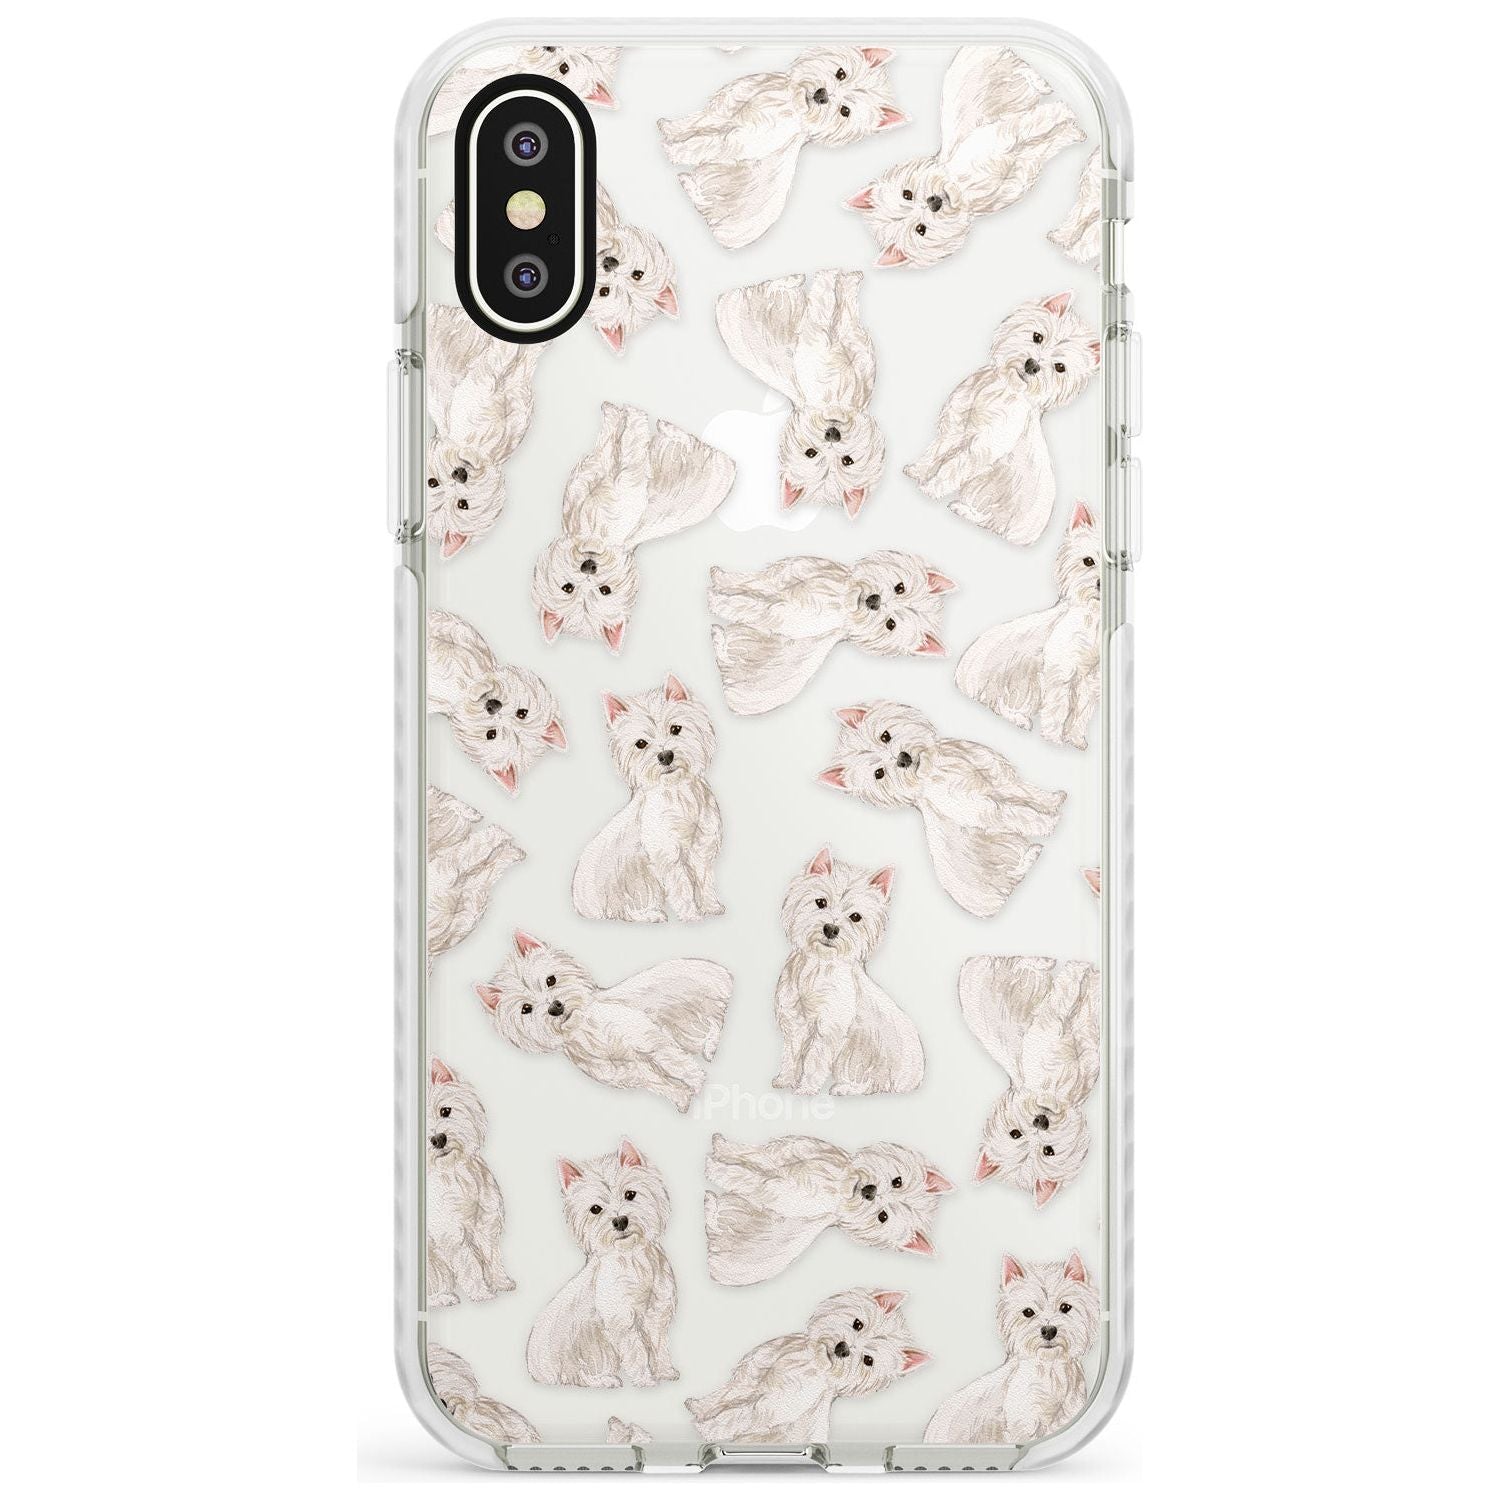 Westie Watercolour Dog Pattern Impact Phone Case for iPhone X XS Max XR